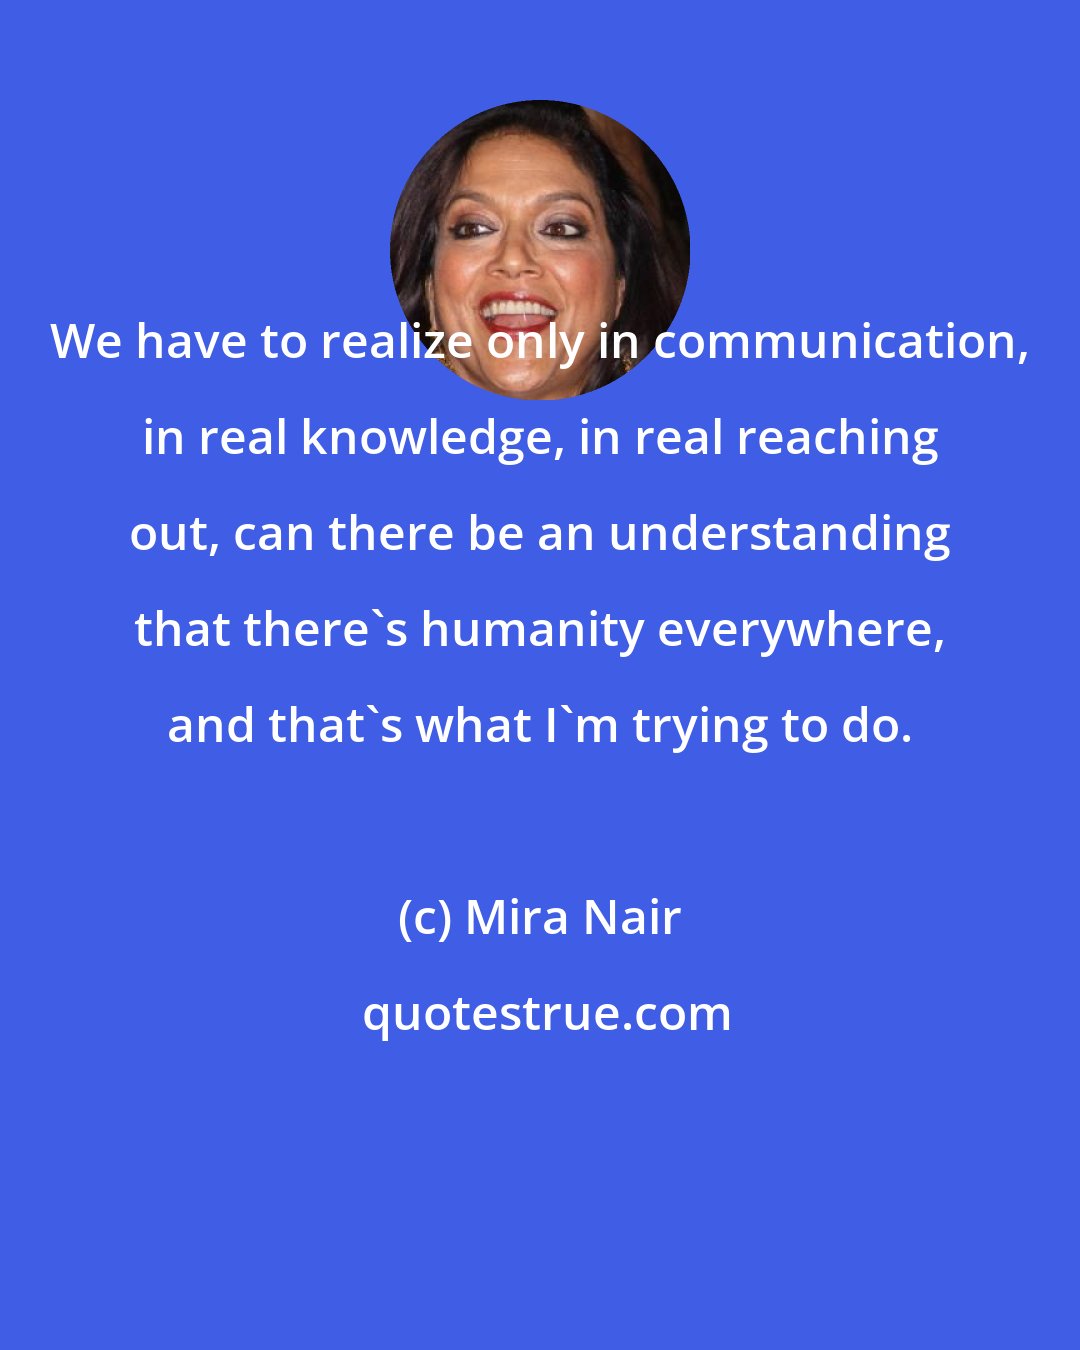 Mira Nair: We have to realize only in communication, in real knowledge, in real reaching out, can there be an understanding that there's humanity everywhere, and that's what I'm trying to do.